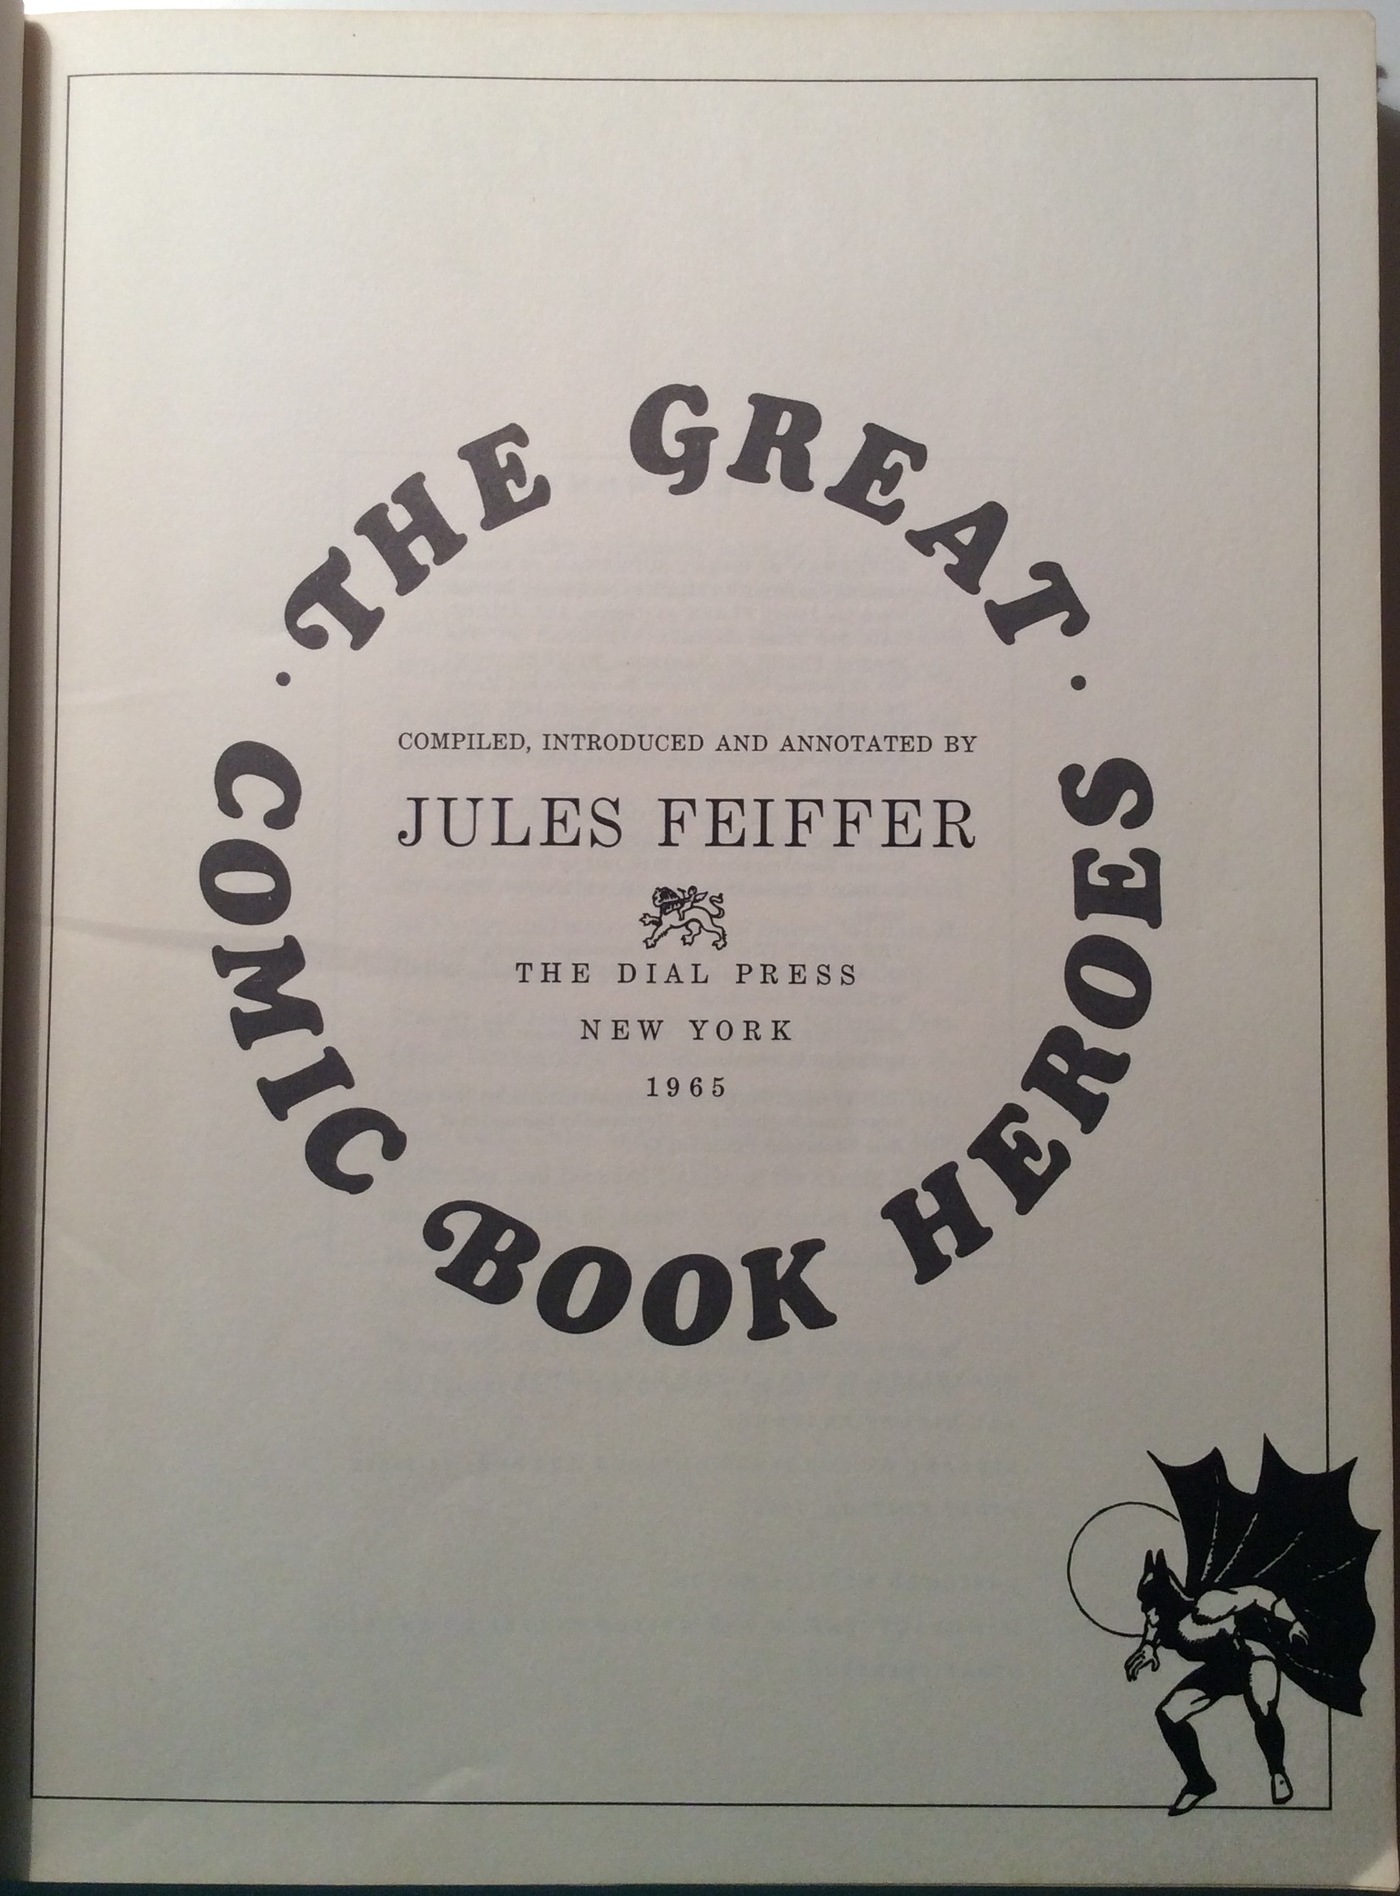 the great comic book heroes by jules feiffer